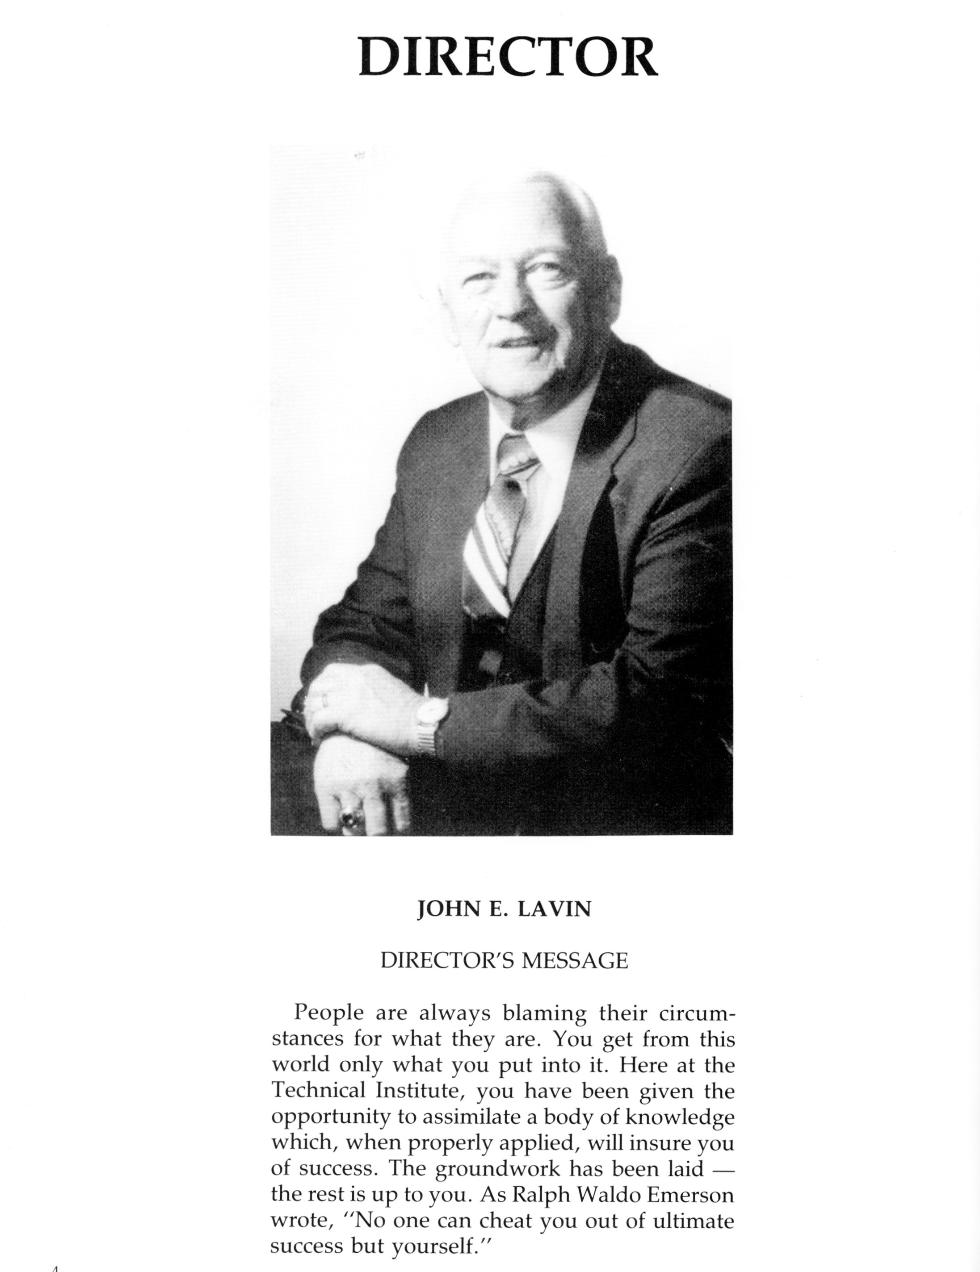 Worcester Industrial Technical Institute Class of 1987 Yearbook Director John Lavin Message